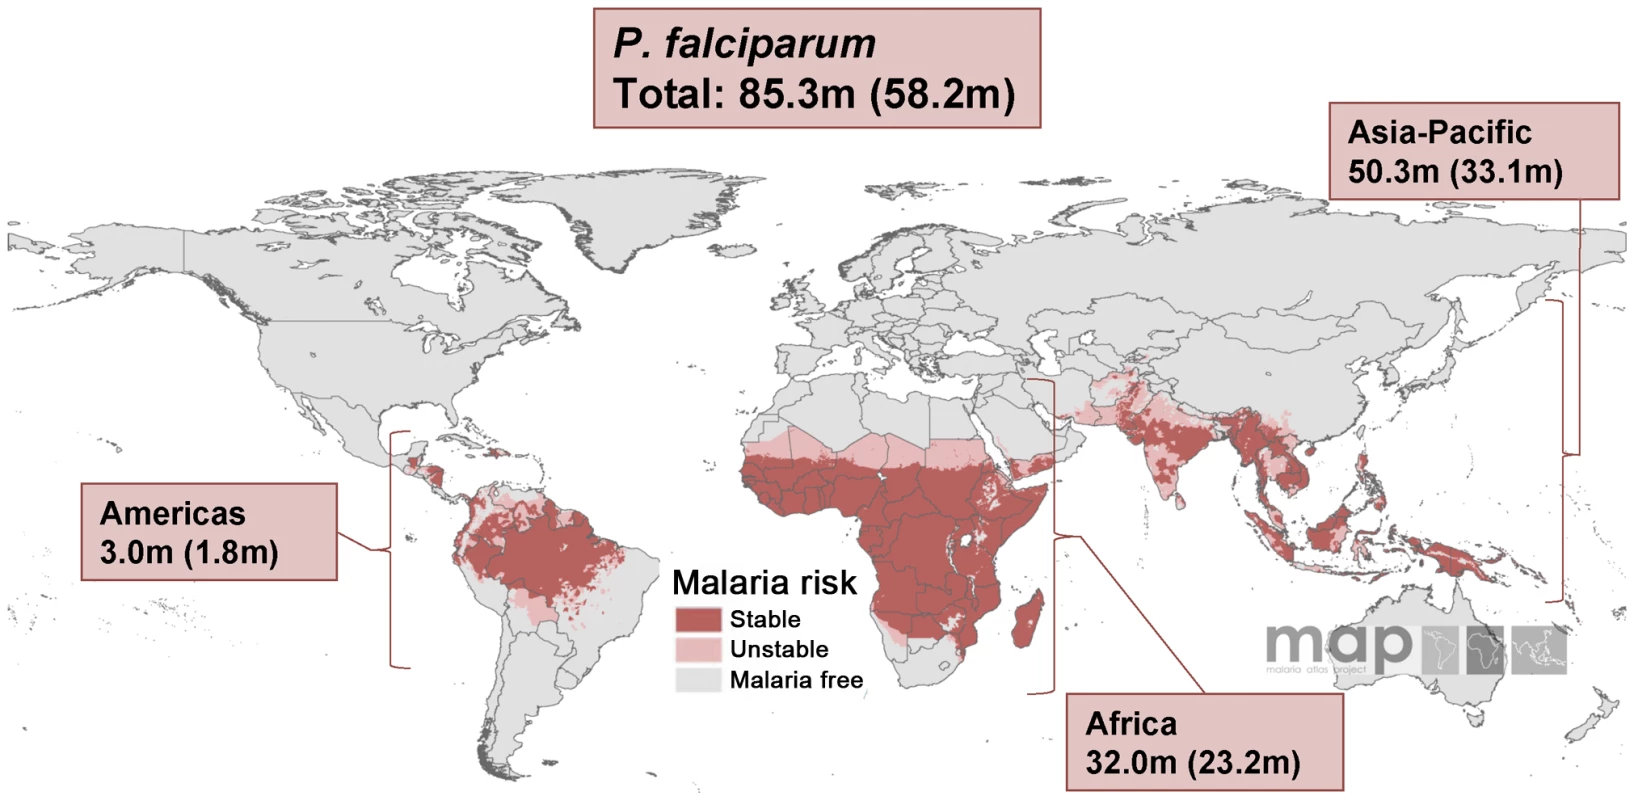 Malaria risk map for &lt;i&gt;P. falciparum&lt;/i&gt; and corresponding number of pregnancies in each continent in 2007.